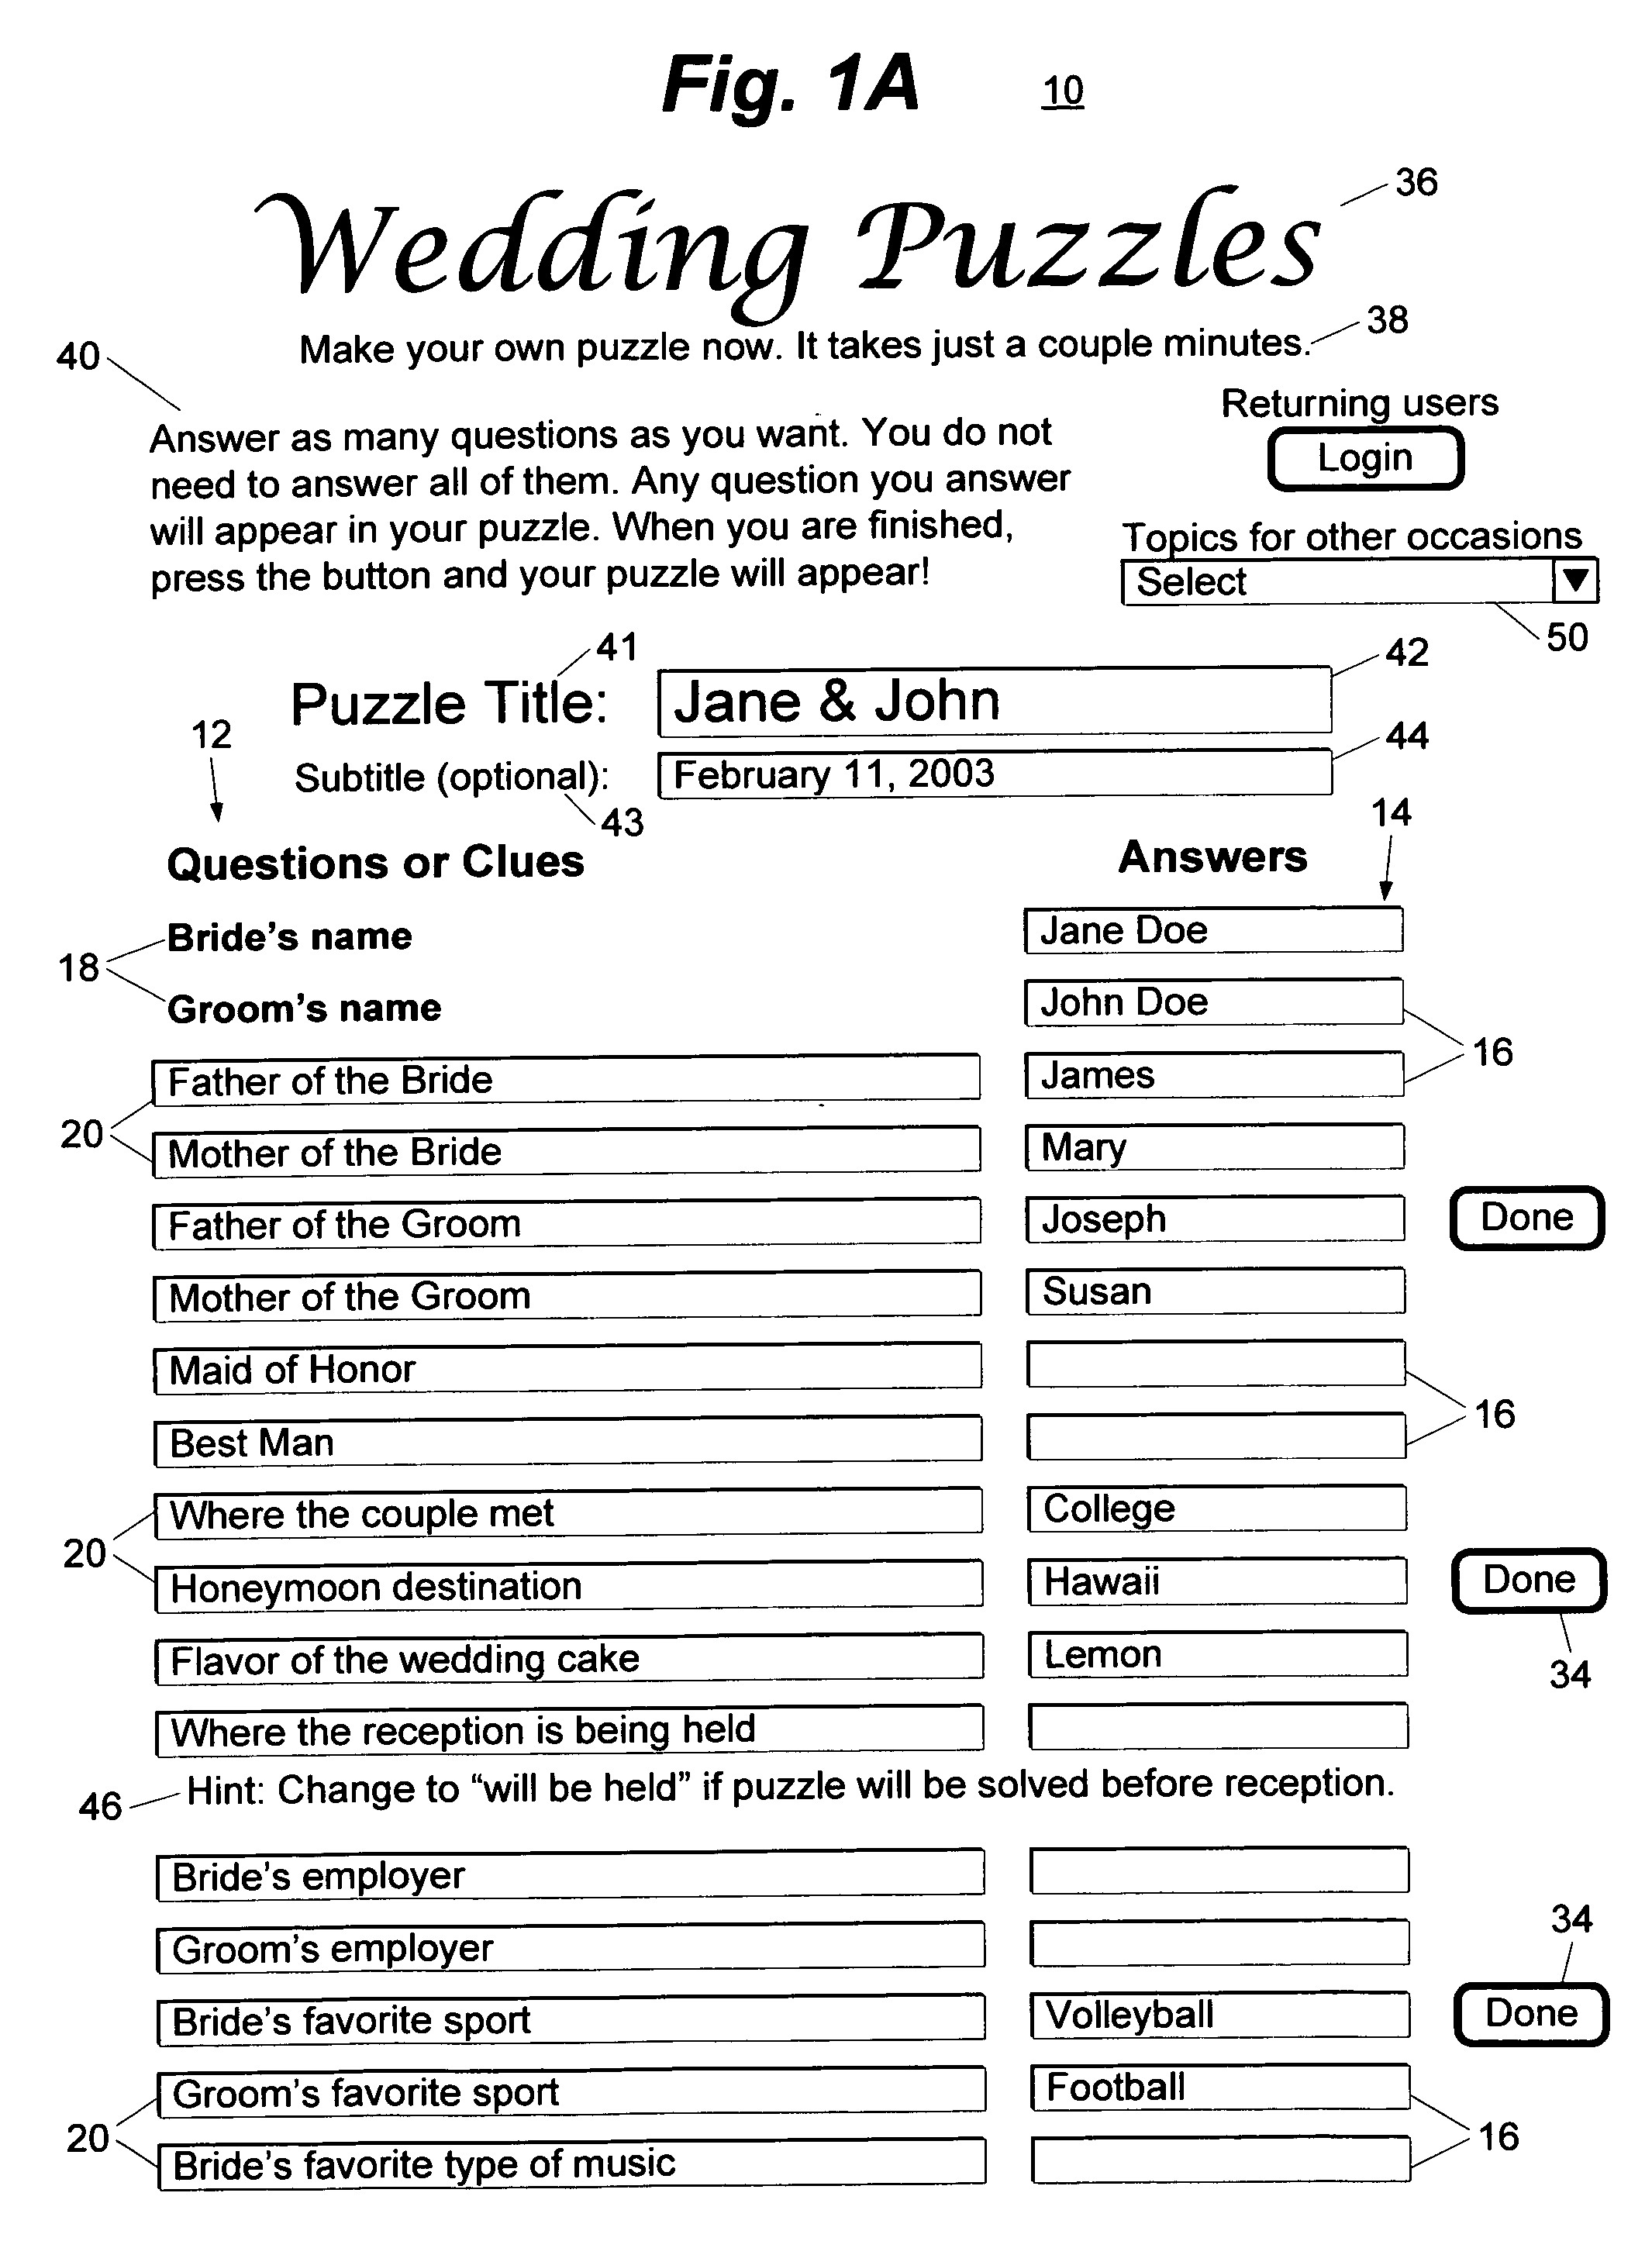 Questionnaire method of making topic-specific word puzzle documents